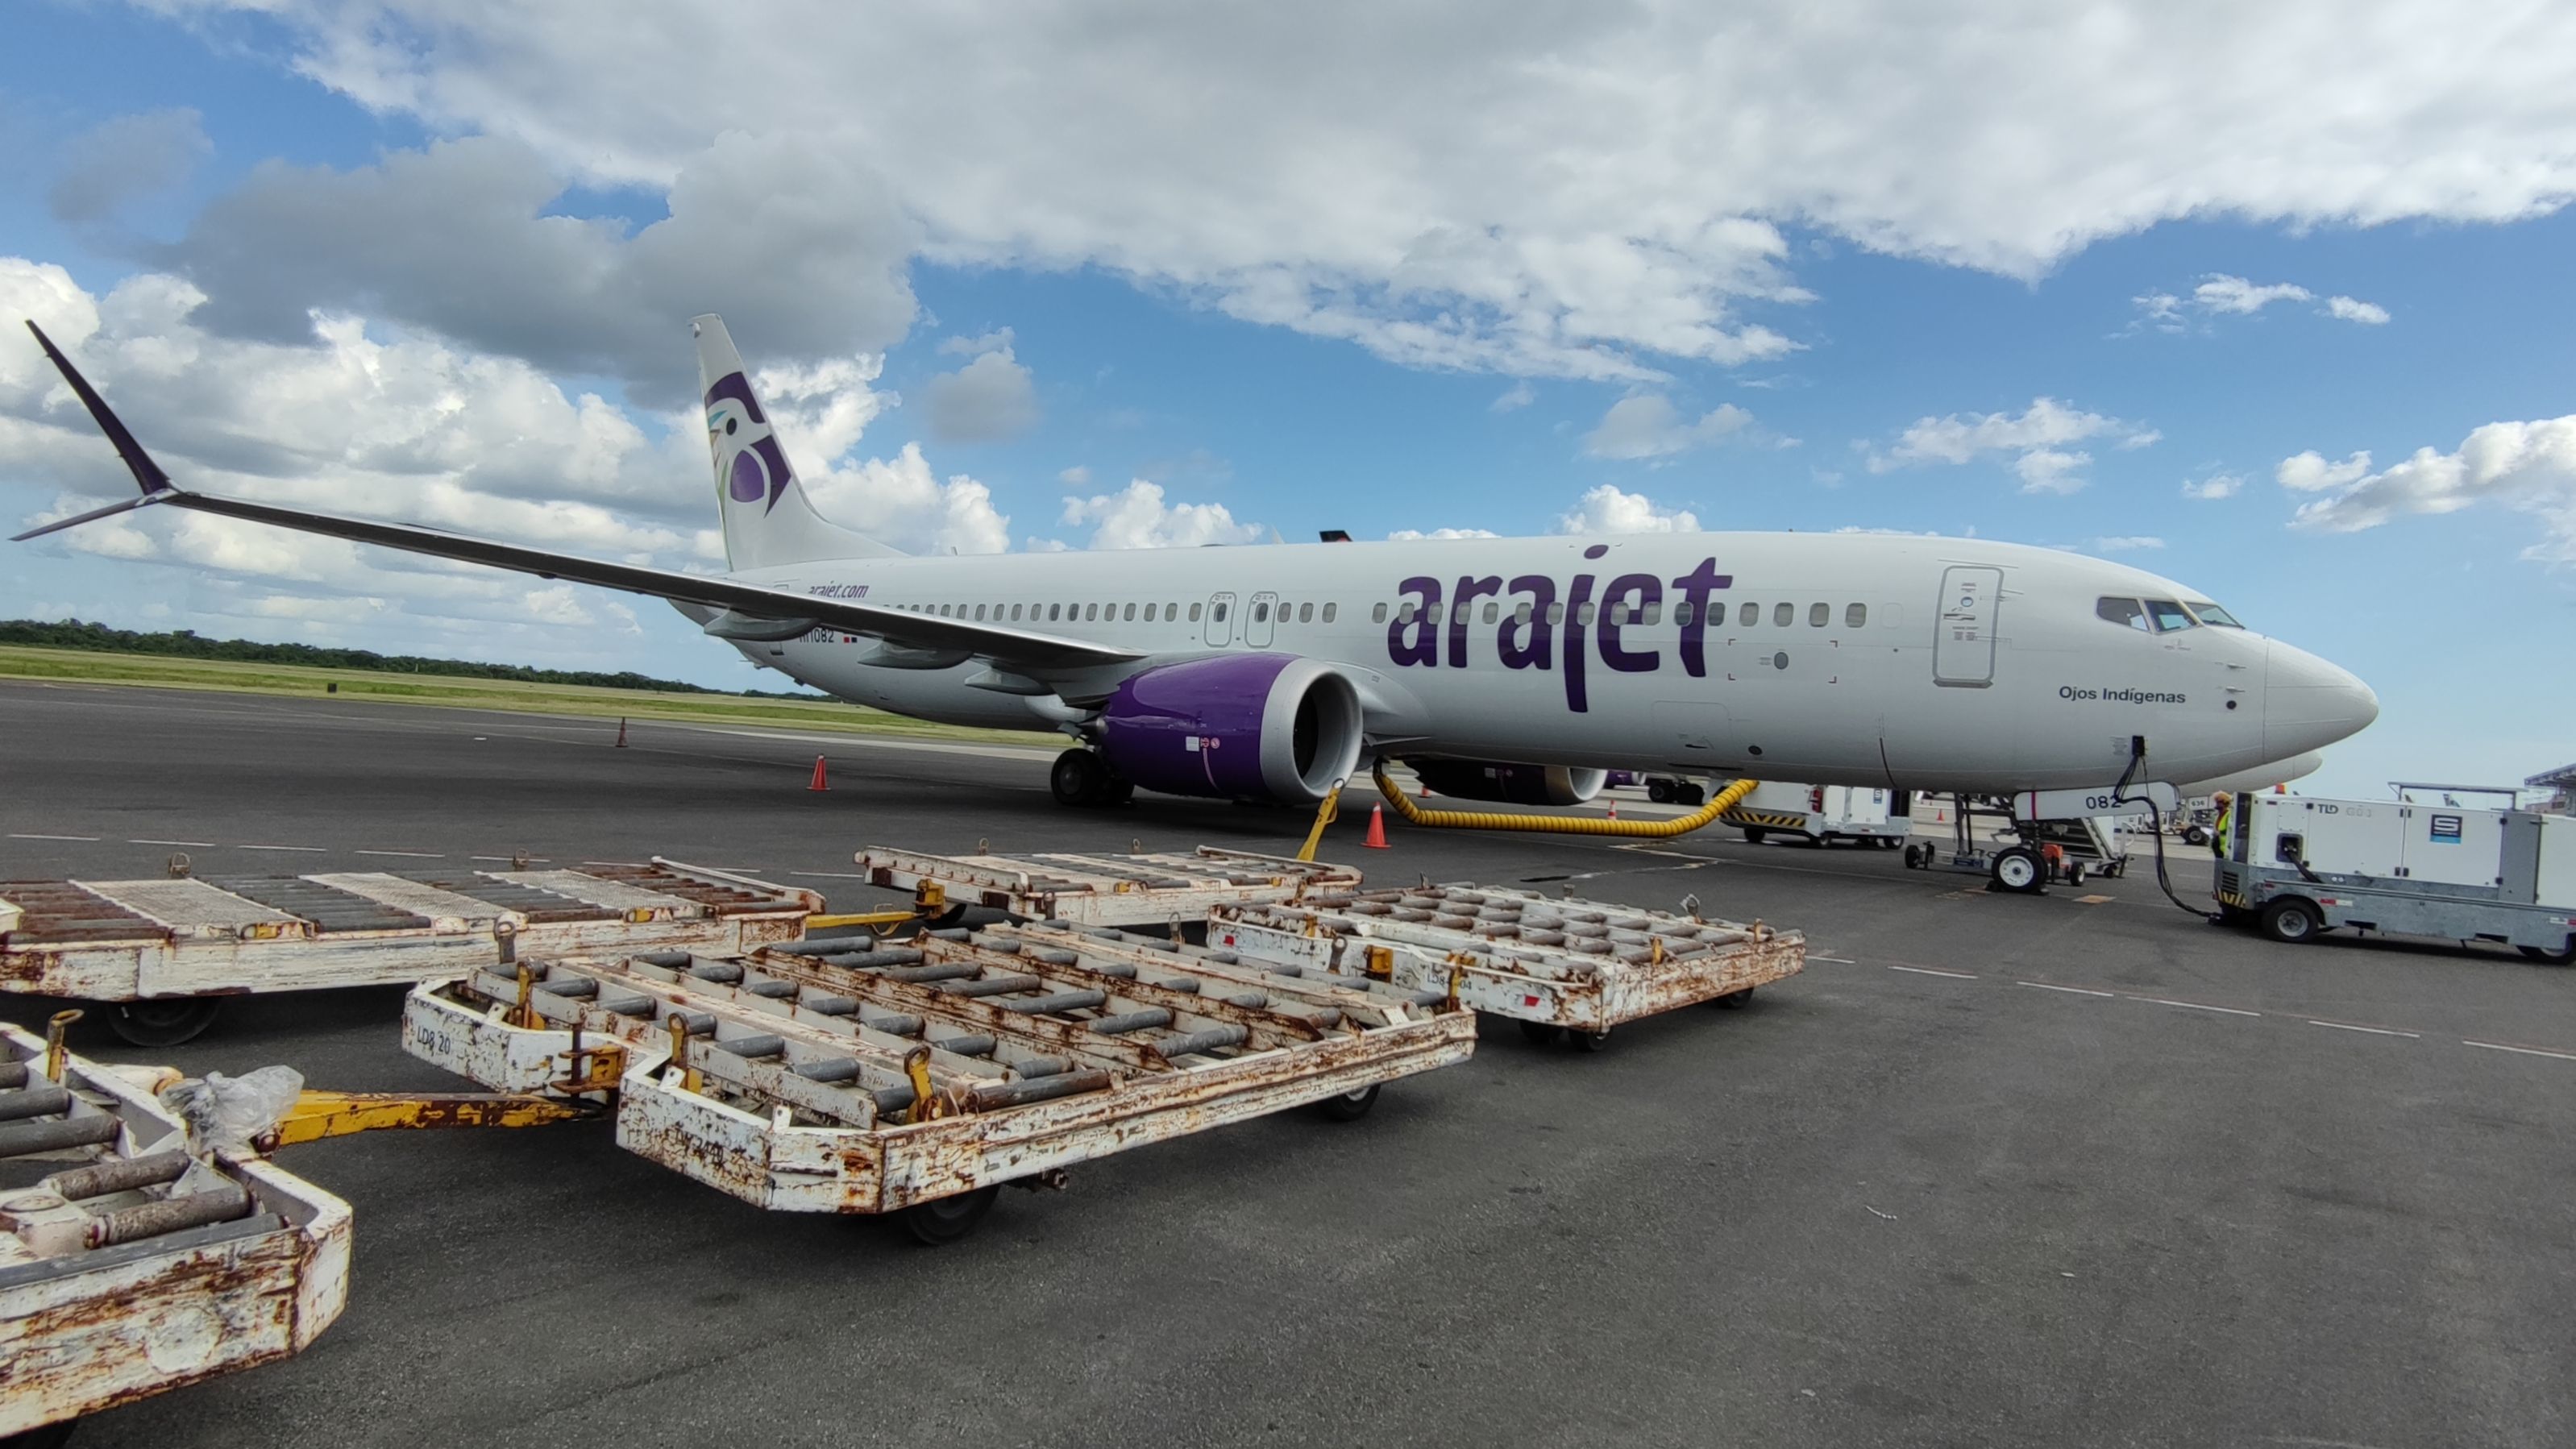 NEW LOW COST AIRLINE COMPANY in BRAZIL - FLYING WITH ARAJET - CHEAP TICKETS  TO THE CARIBBEAN 